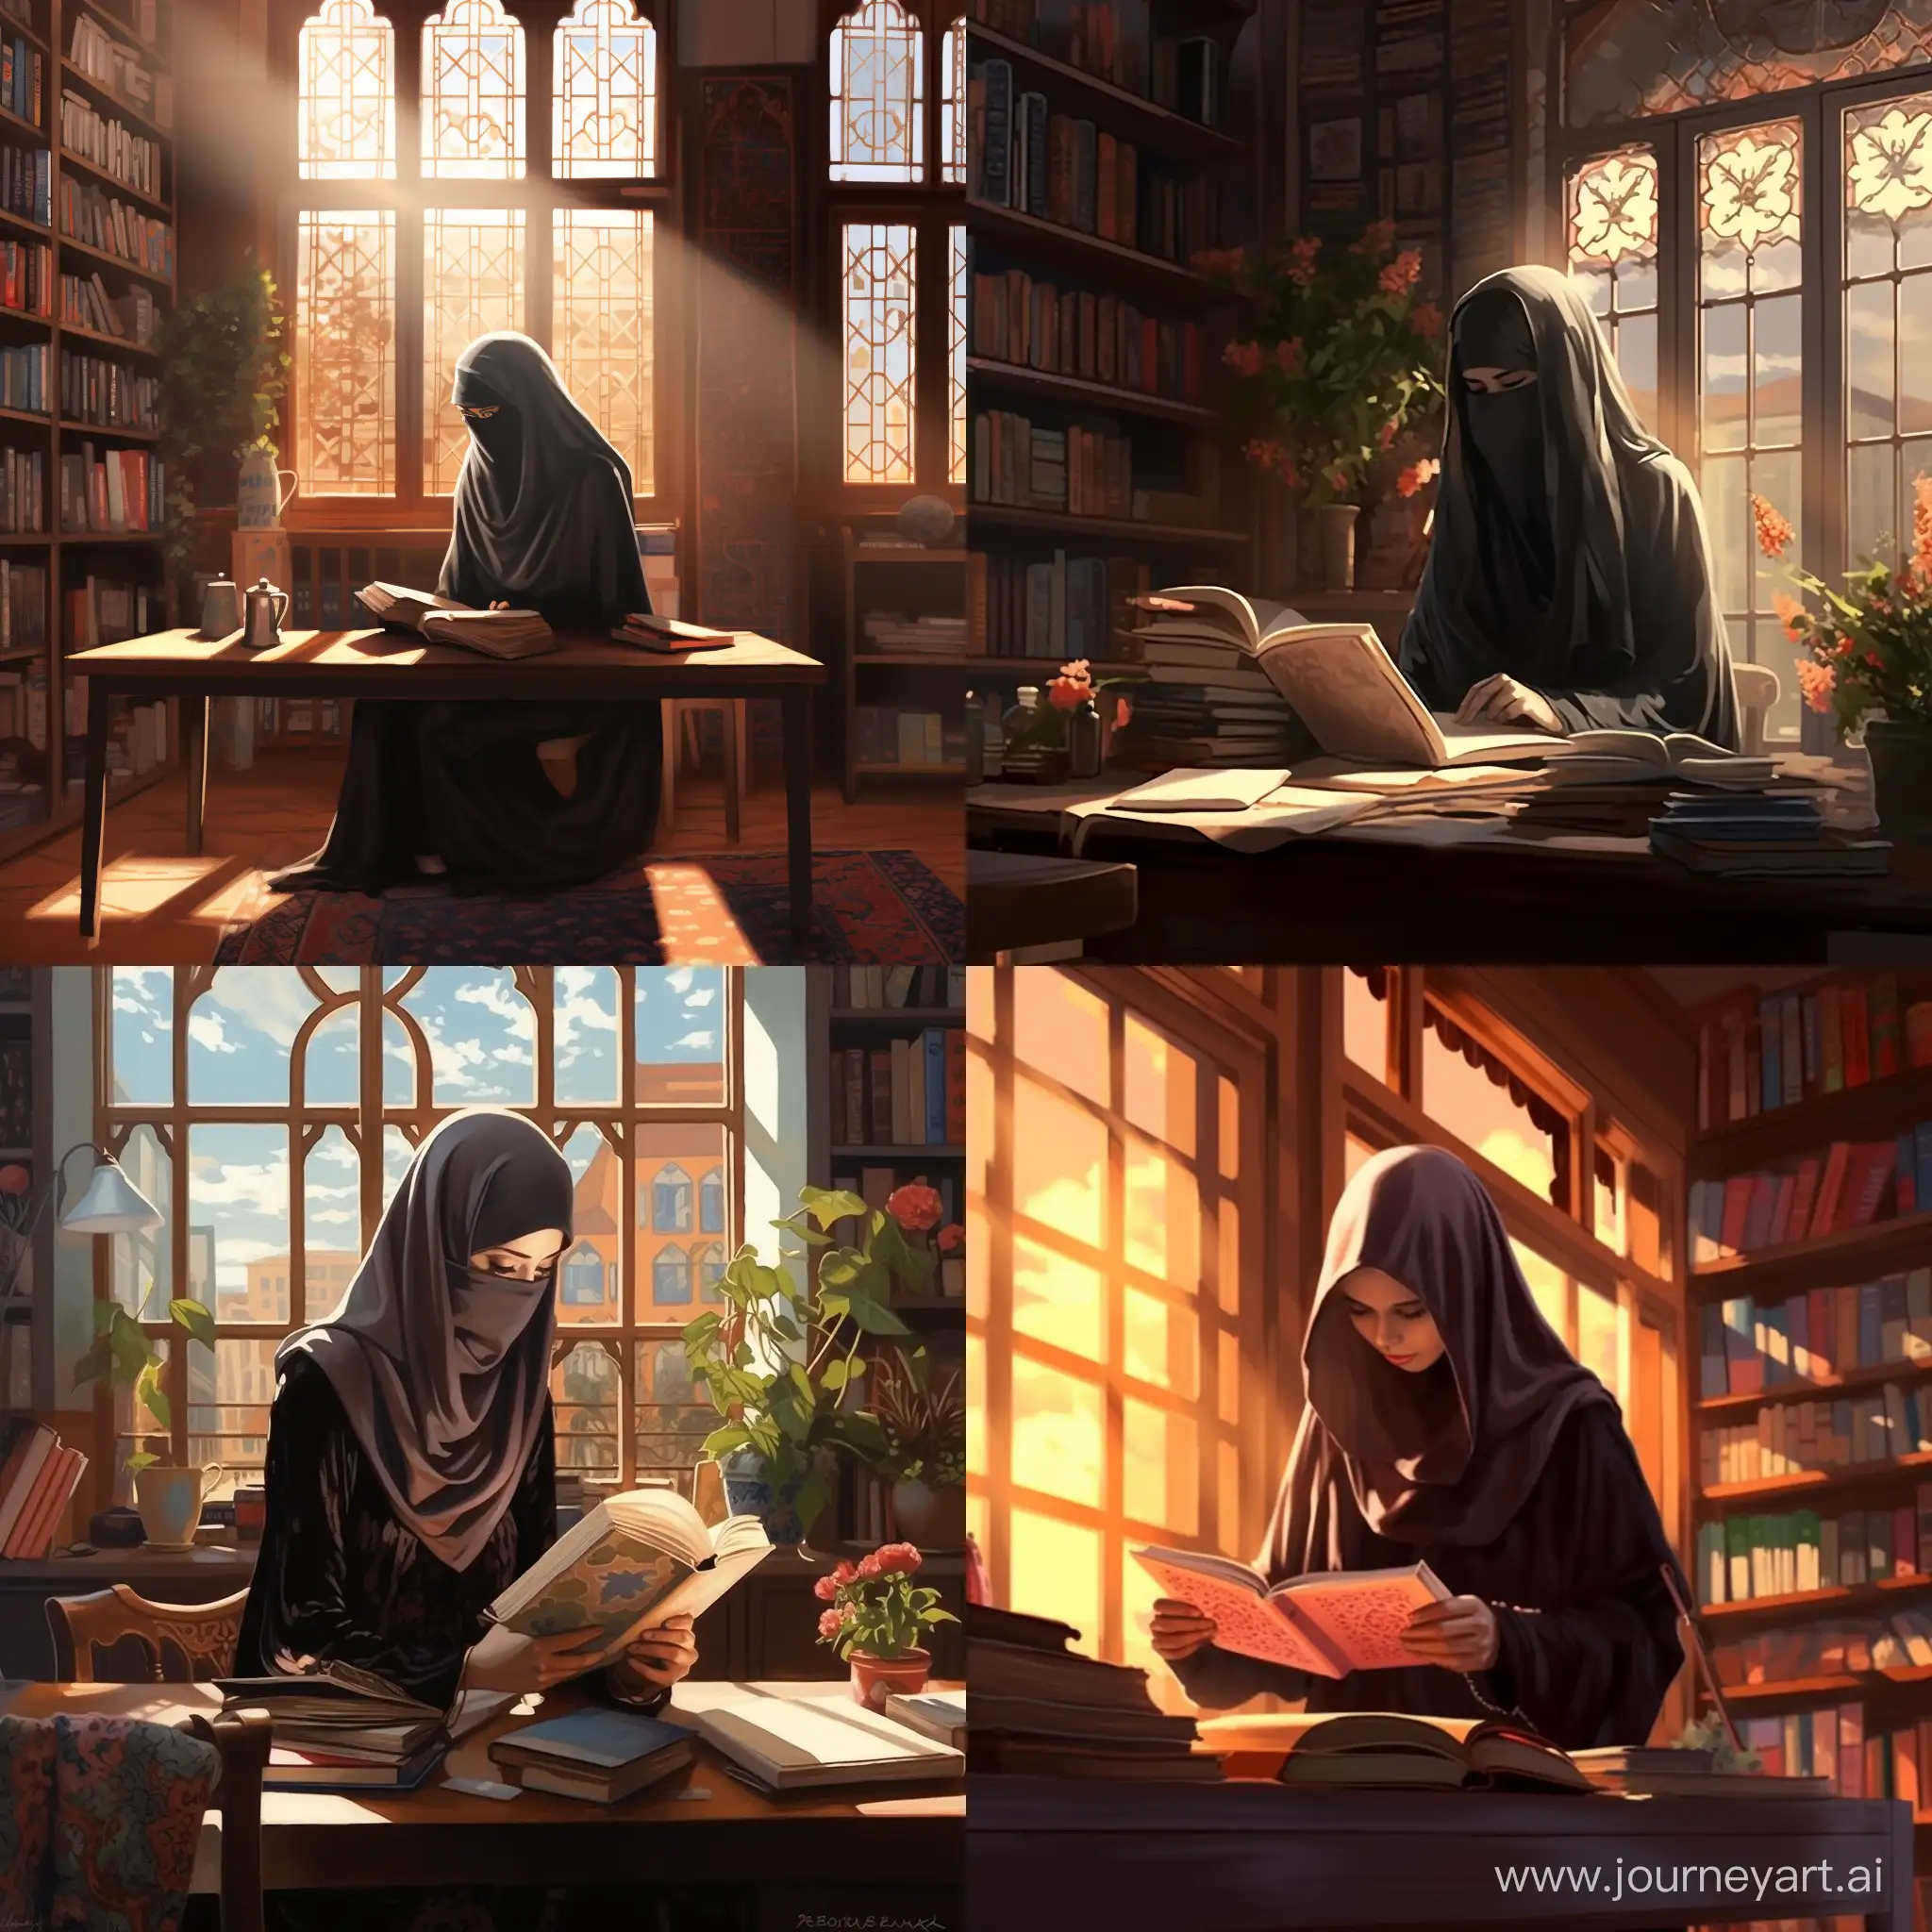 Muslim-Girl-Studying-with-Books-and-Pen-in-Bright-Library-Room